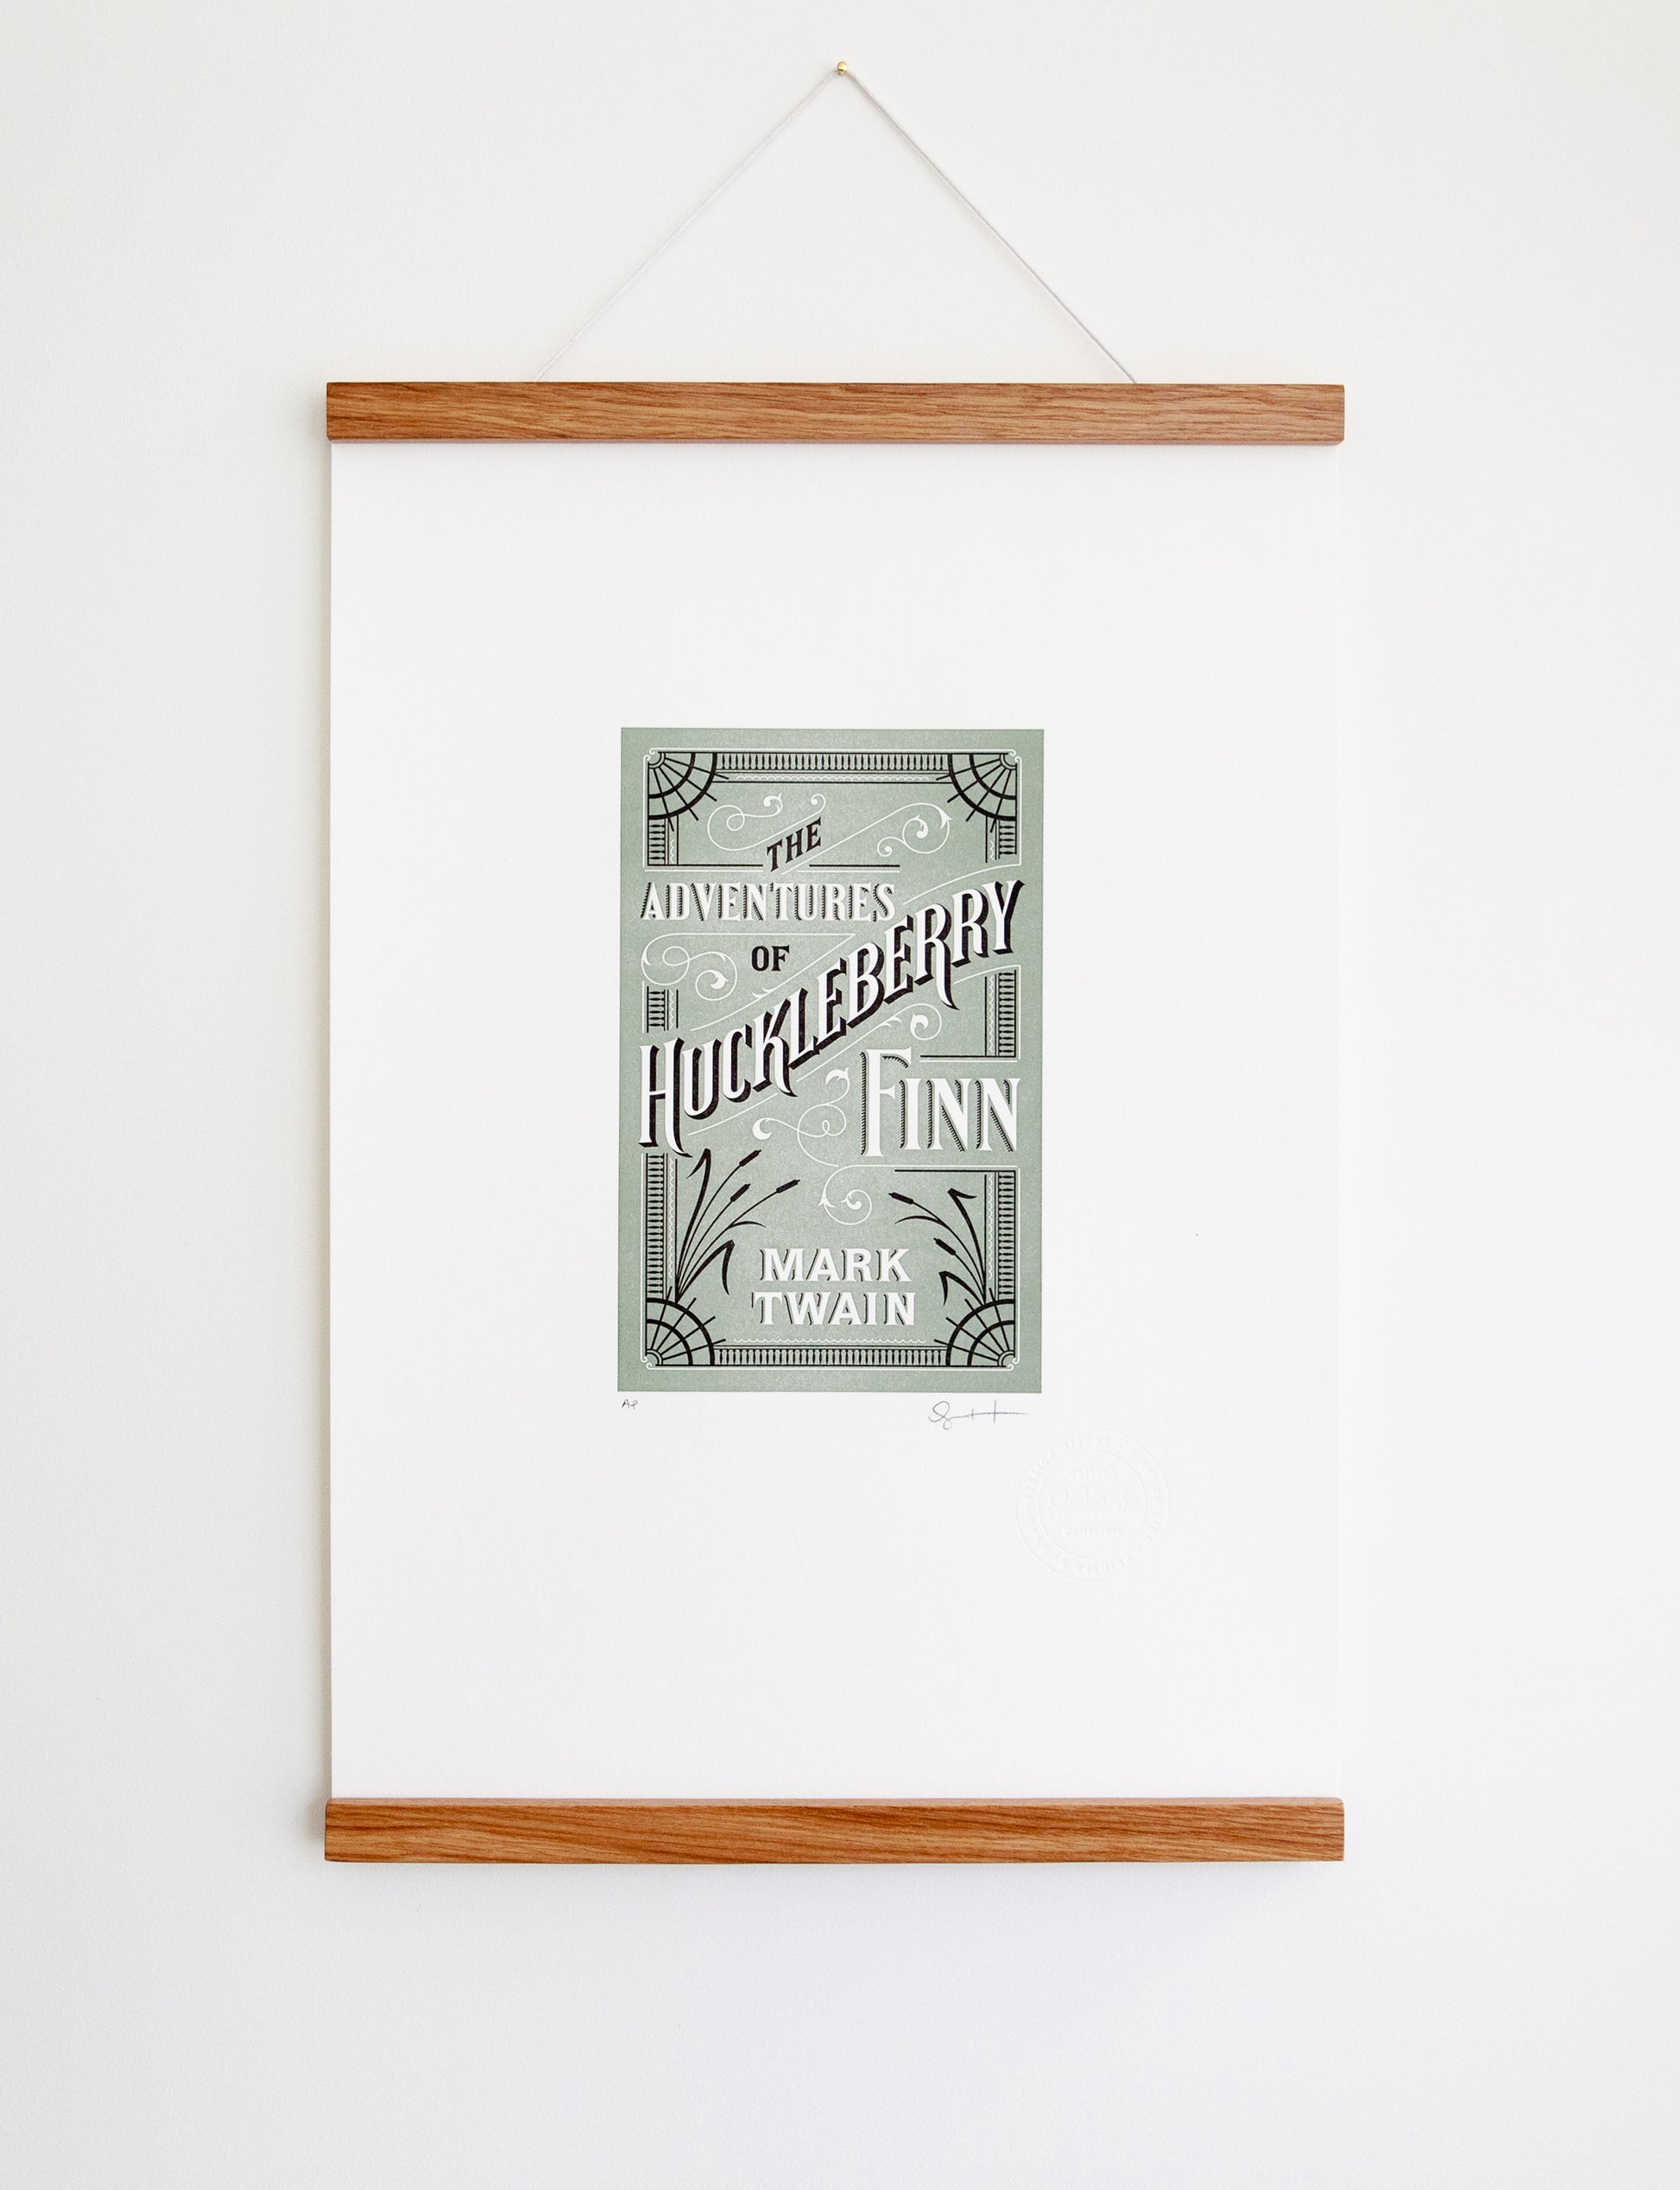 Framed 2-color letterpress print in green and black. Printed artwork is an illustrated book cover of The Adventures of Huckleberry Finn including custom hand lettering.